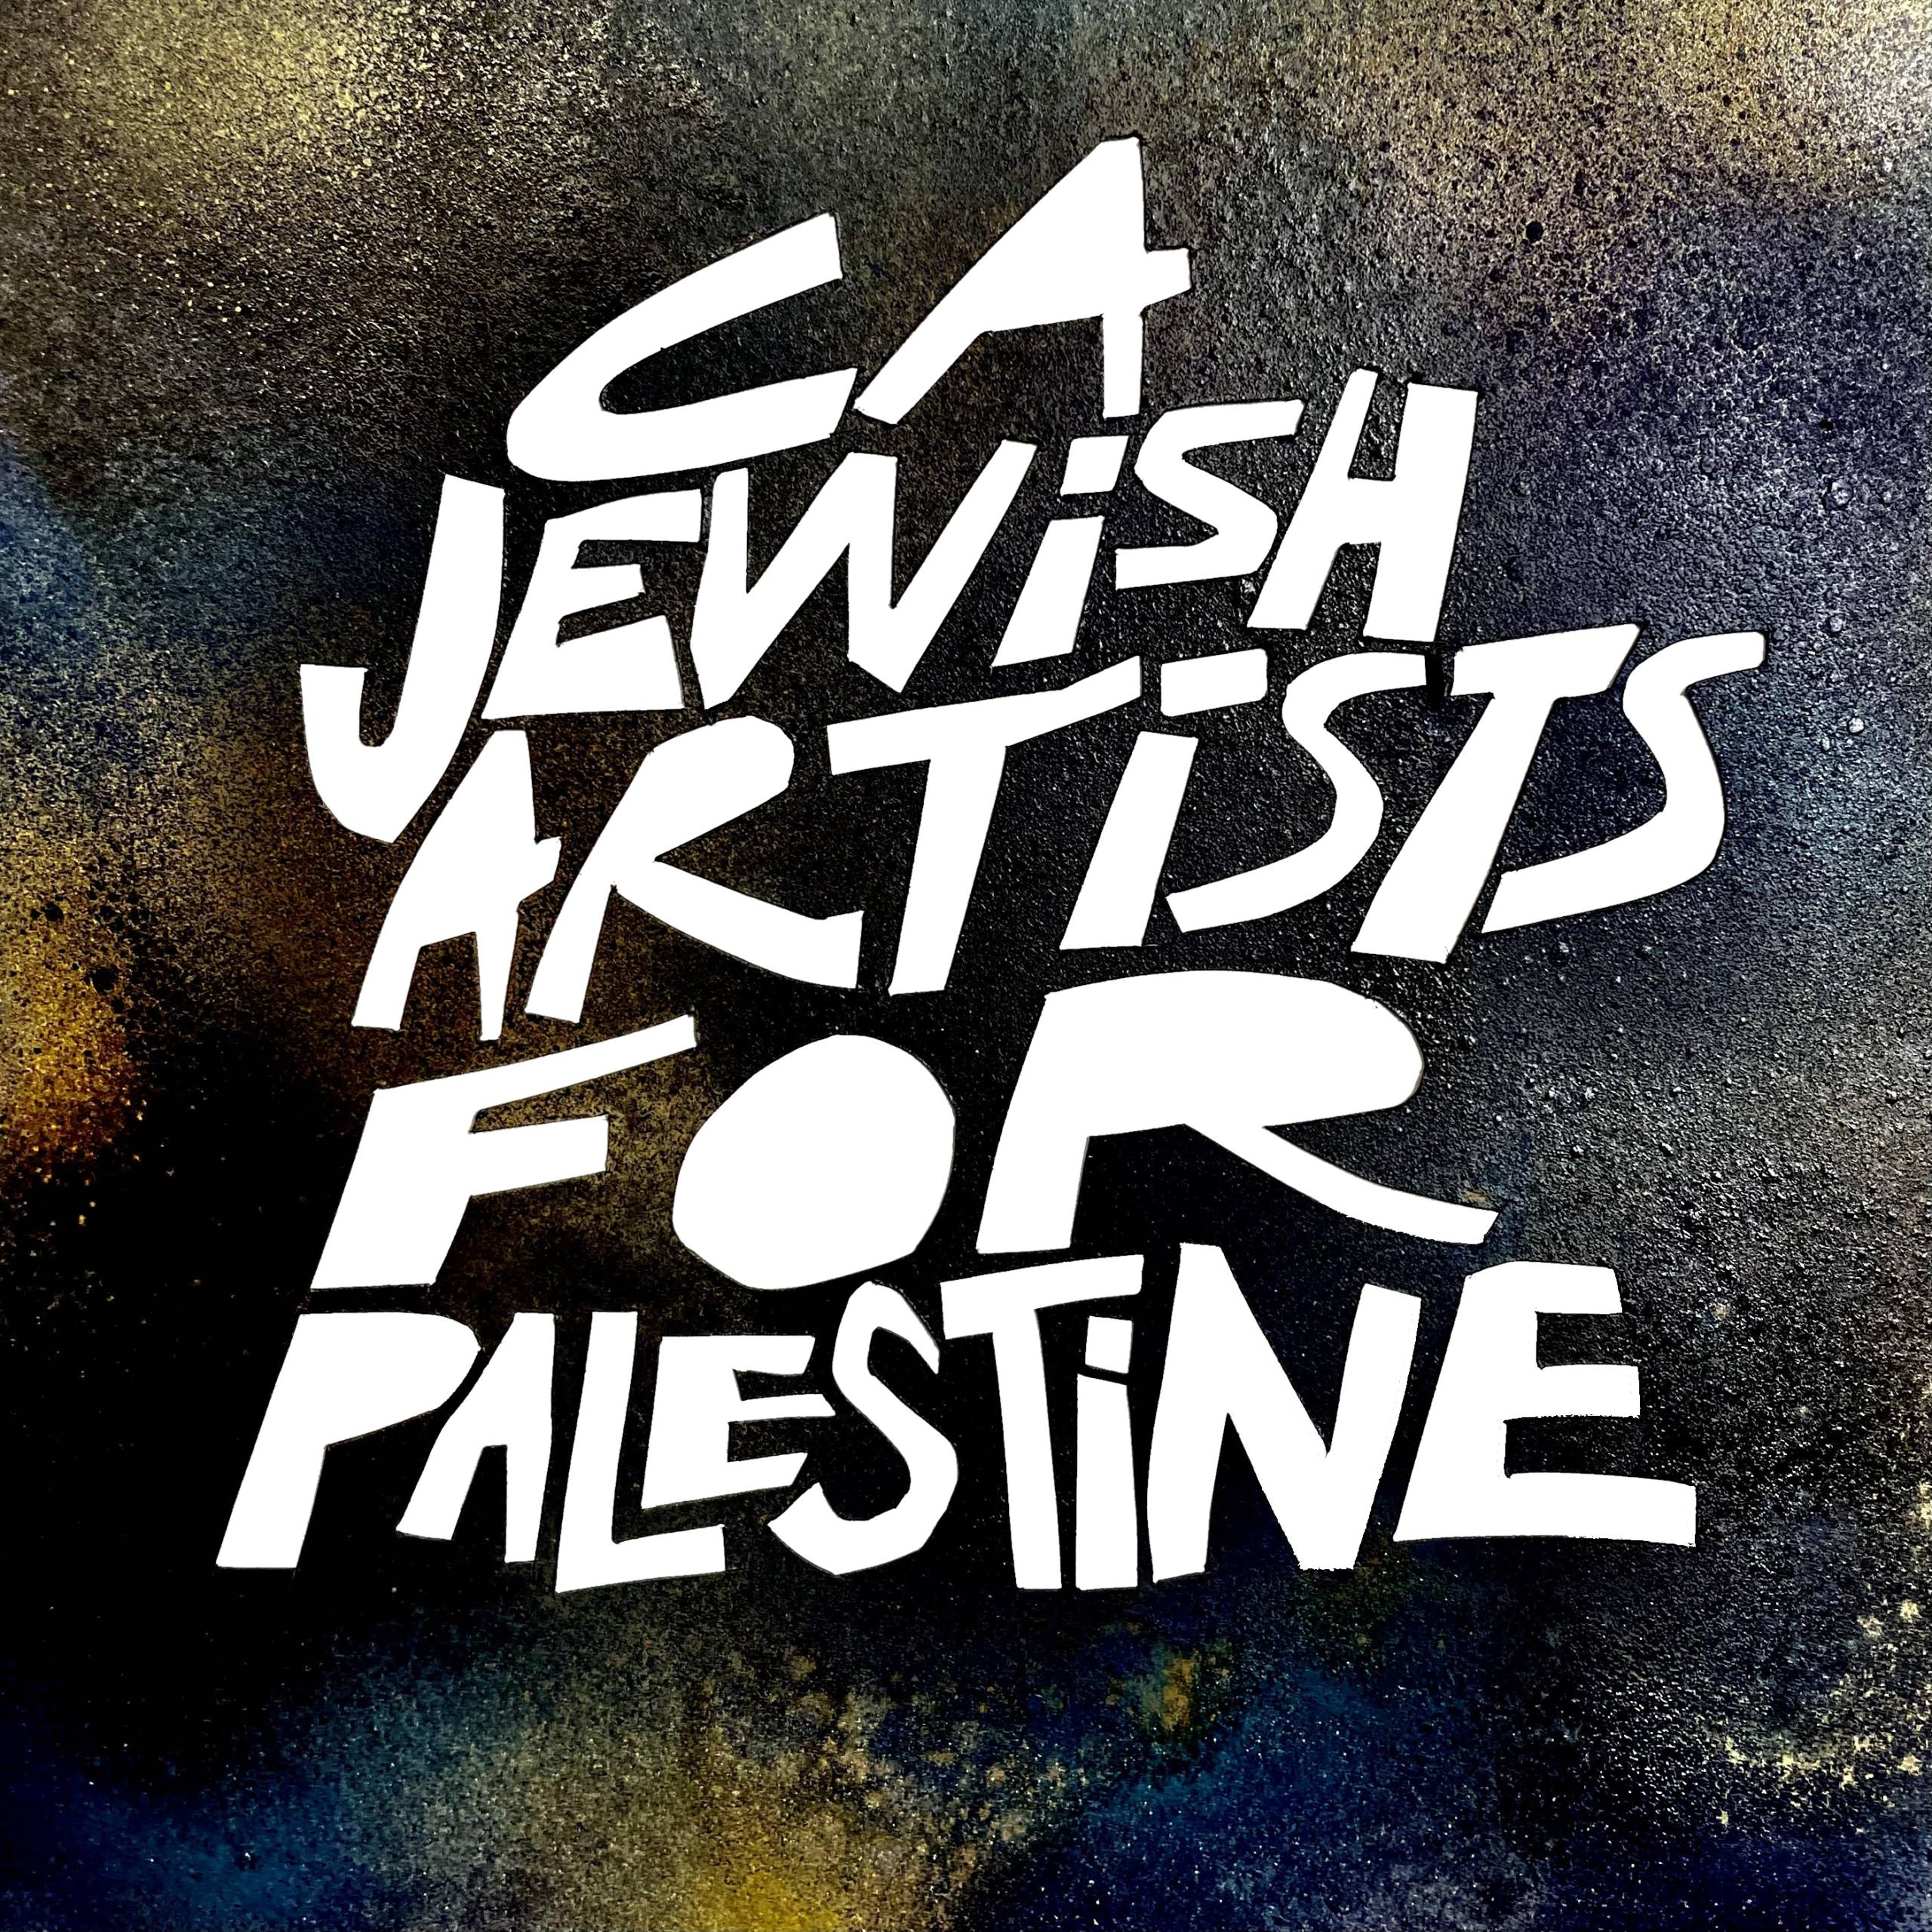 A spray painted background with brown, black and purple, overlaid with white letters that say "CA Jewish Artists for Palestine."